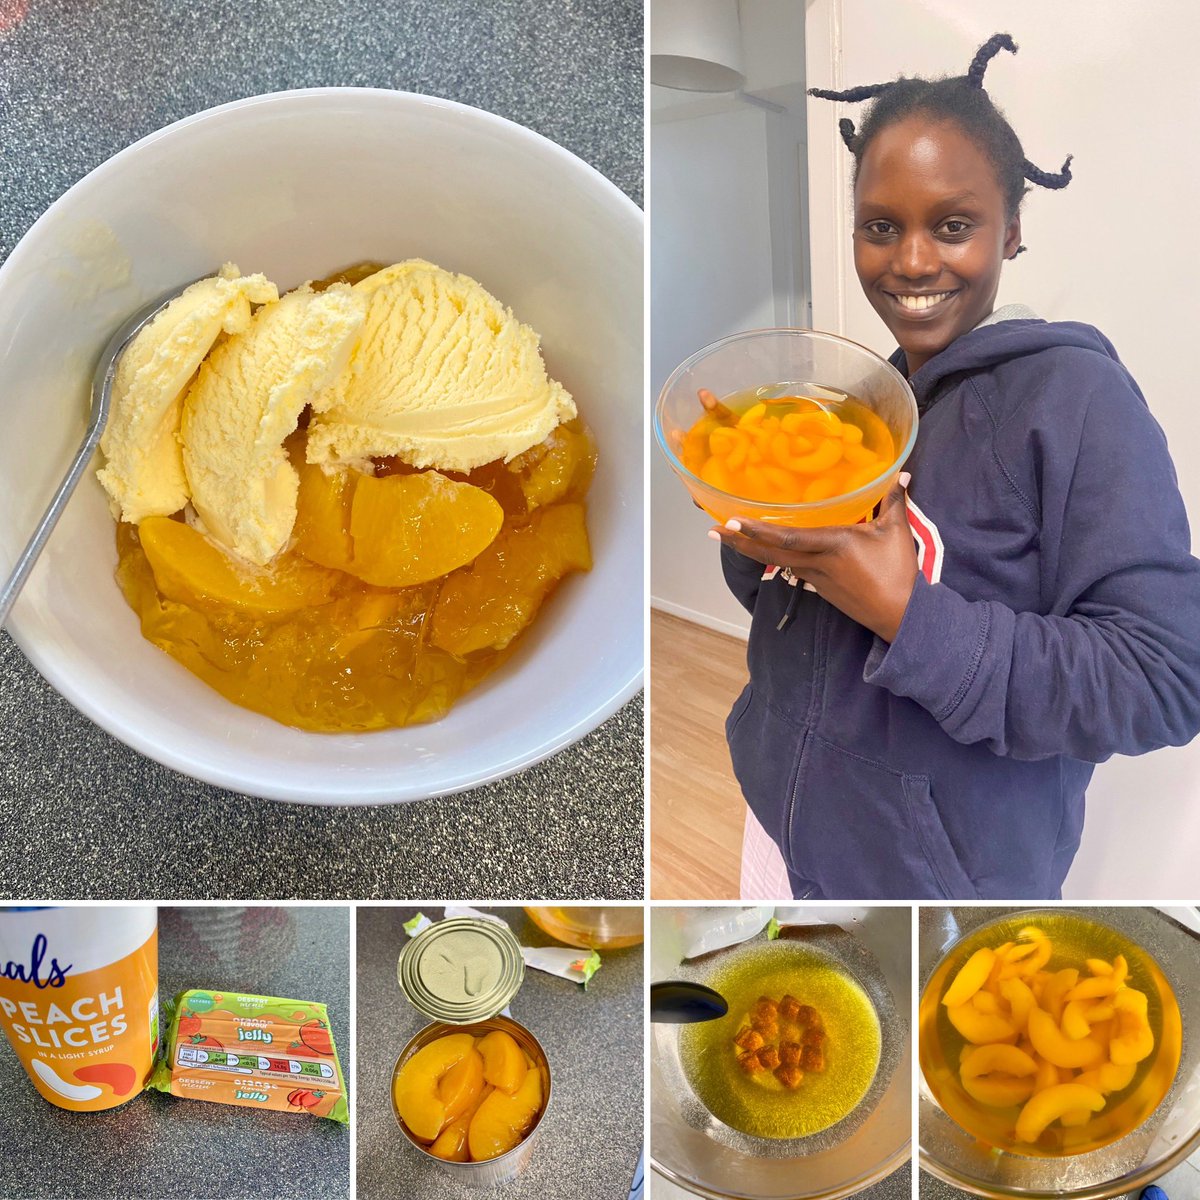 Seems jelly is not a big thing in Rwanda so I’ve treated Coco to my home-made @AldiUK recipe, with their ice-cream. “Delicious” was her verdict - so now she’s a big fan!